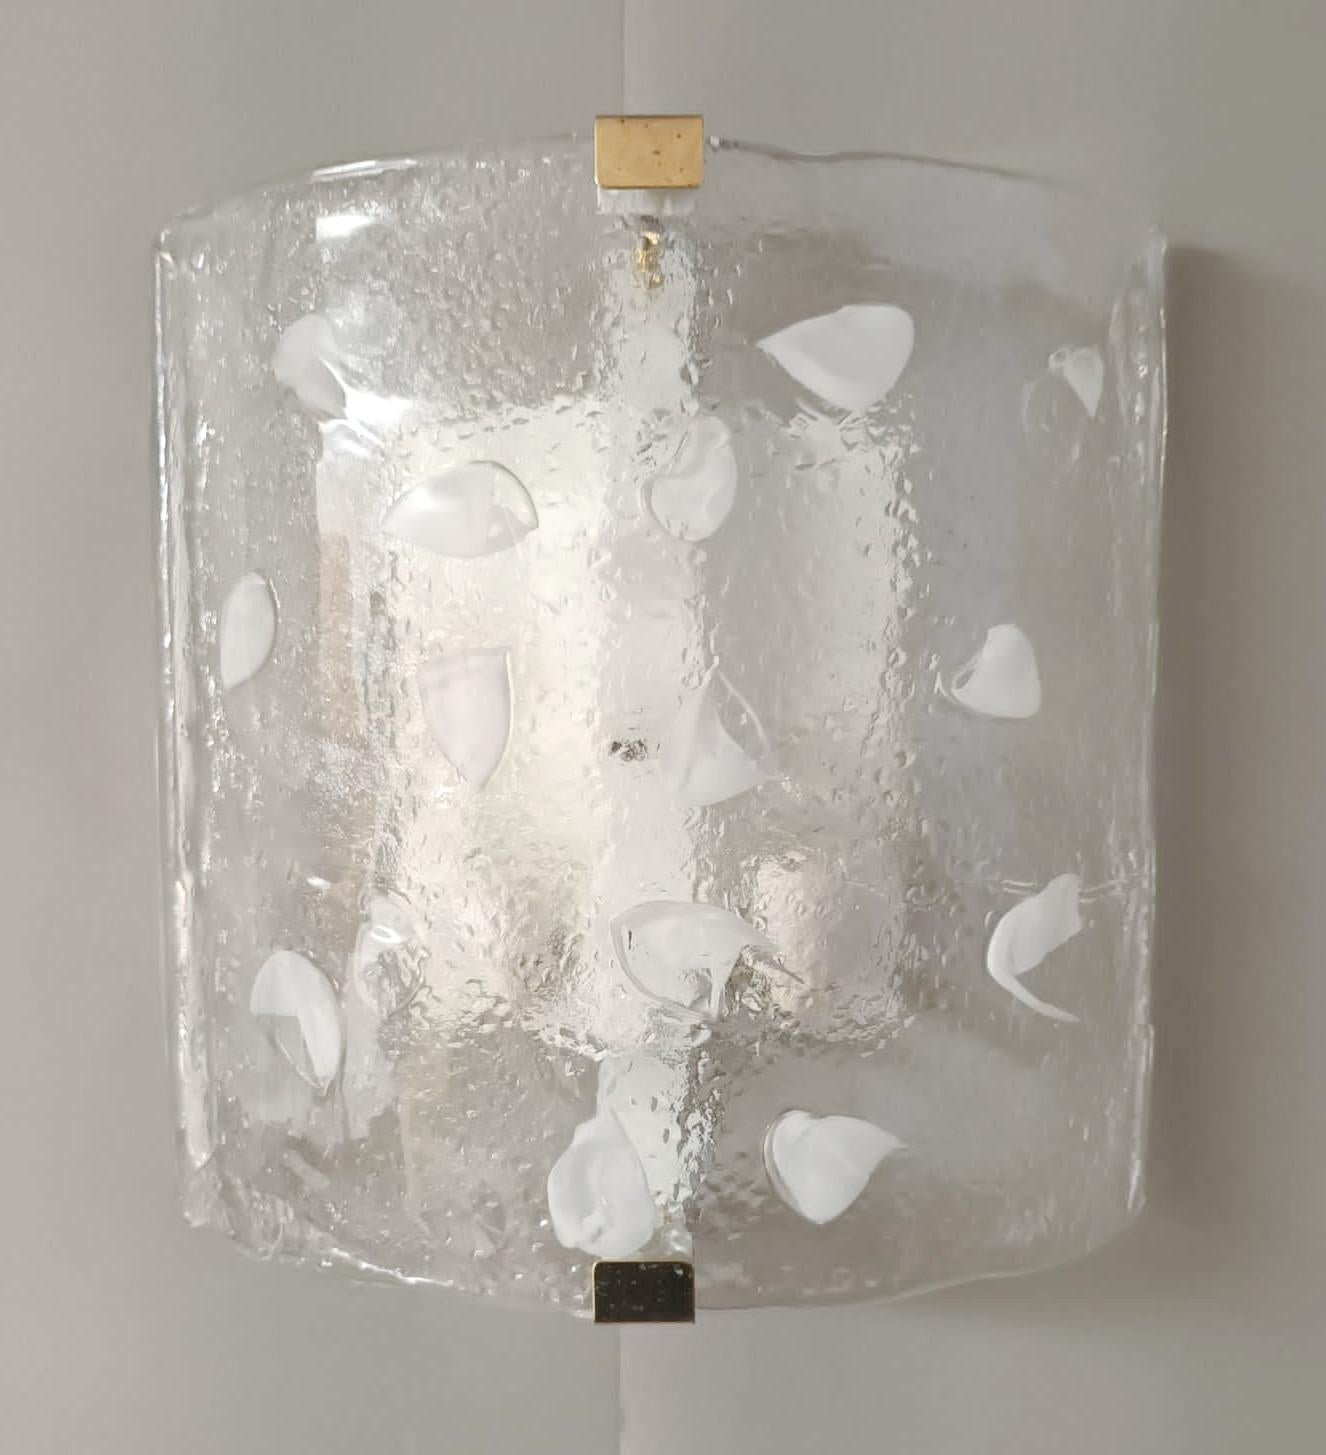 Vintage Italian wall lights with clear curved square Murano glass shades decorated with white colors / Made in Italy by Mazzega, circa 1970s
Height: 12 inches / Width: 12 inches / Depth: 3.5 inches
2 lights / E12 or E14 type / max 40W each
1 pair